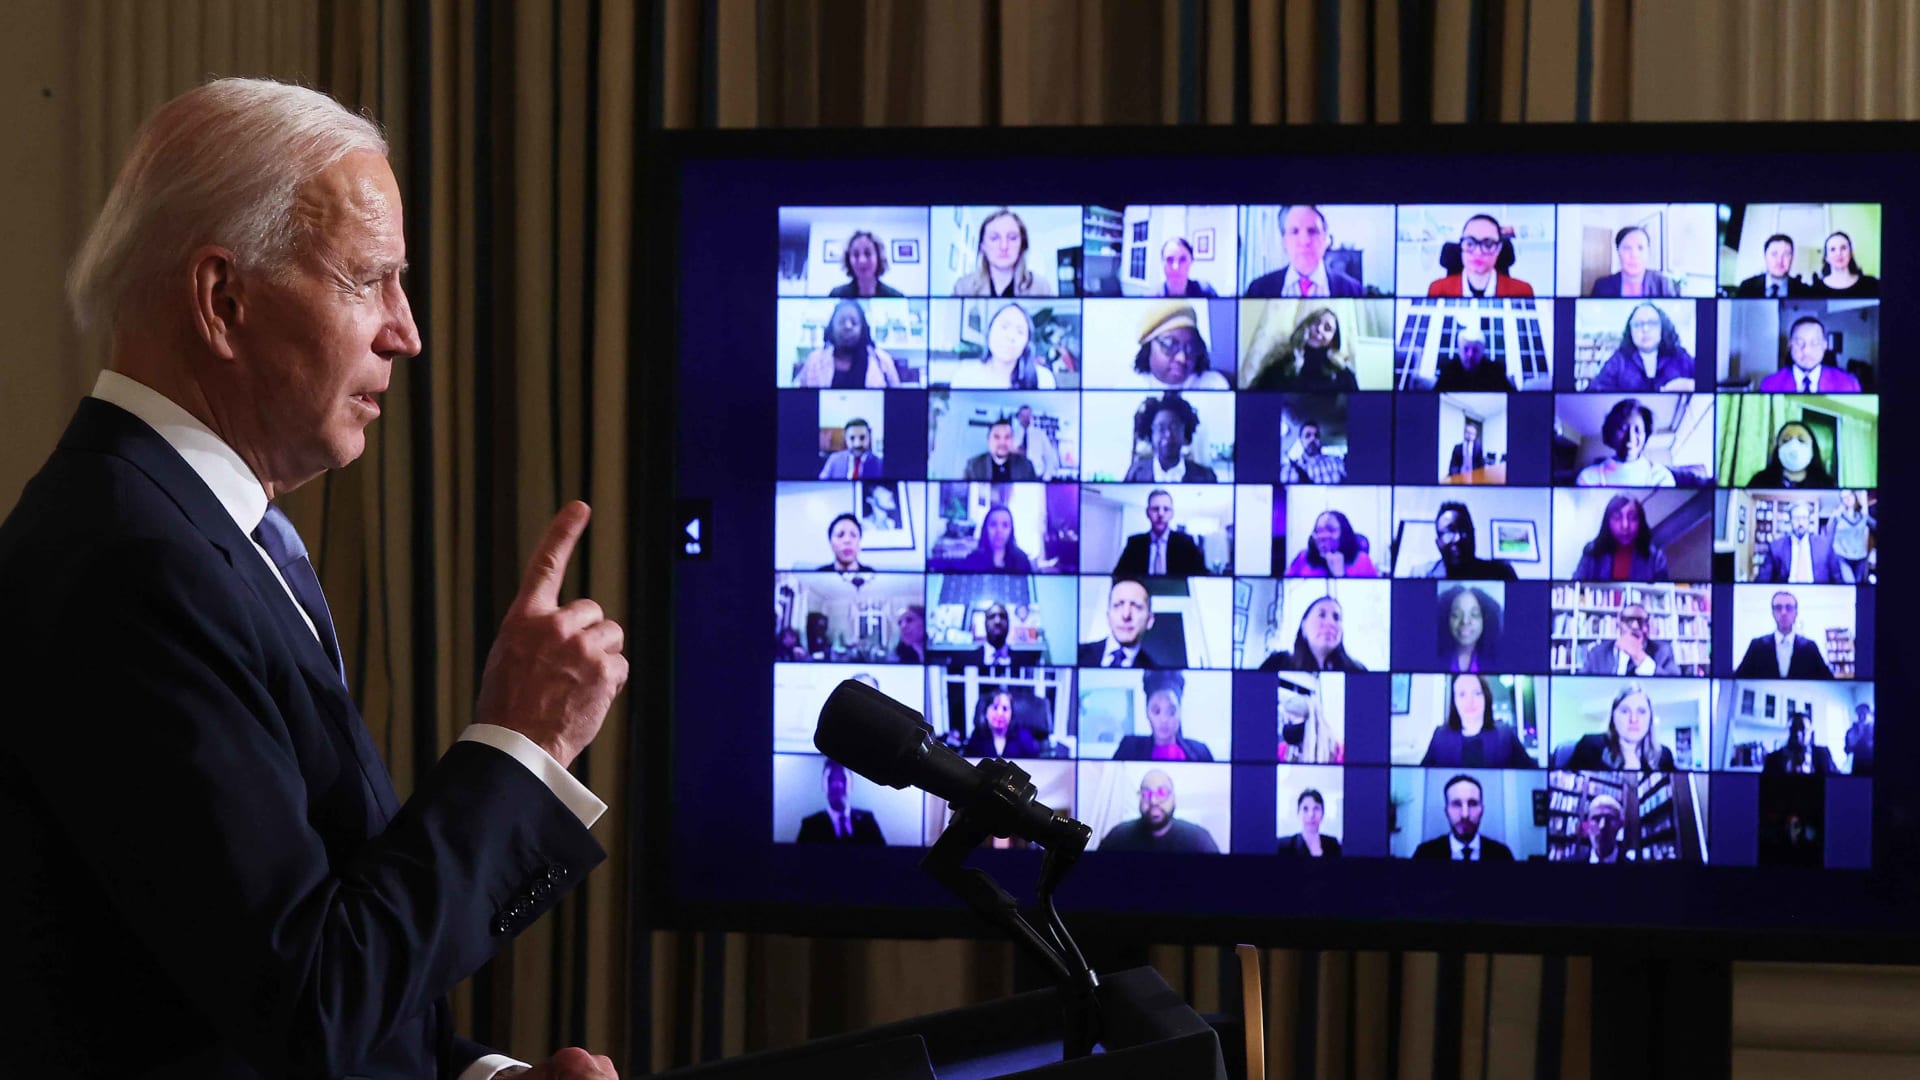 President Joe Biden conducts a virtual swearing-in ceremony for members of his new administration via Zoom just hours after his inauguration in the State Dining Room at the White House, January 20, 2021, in Washington, D.C.